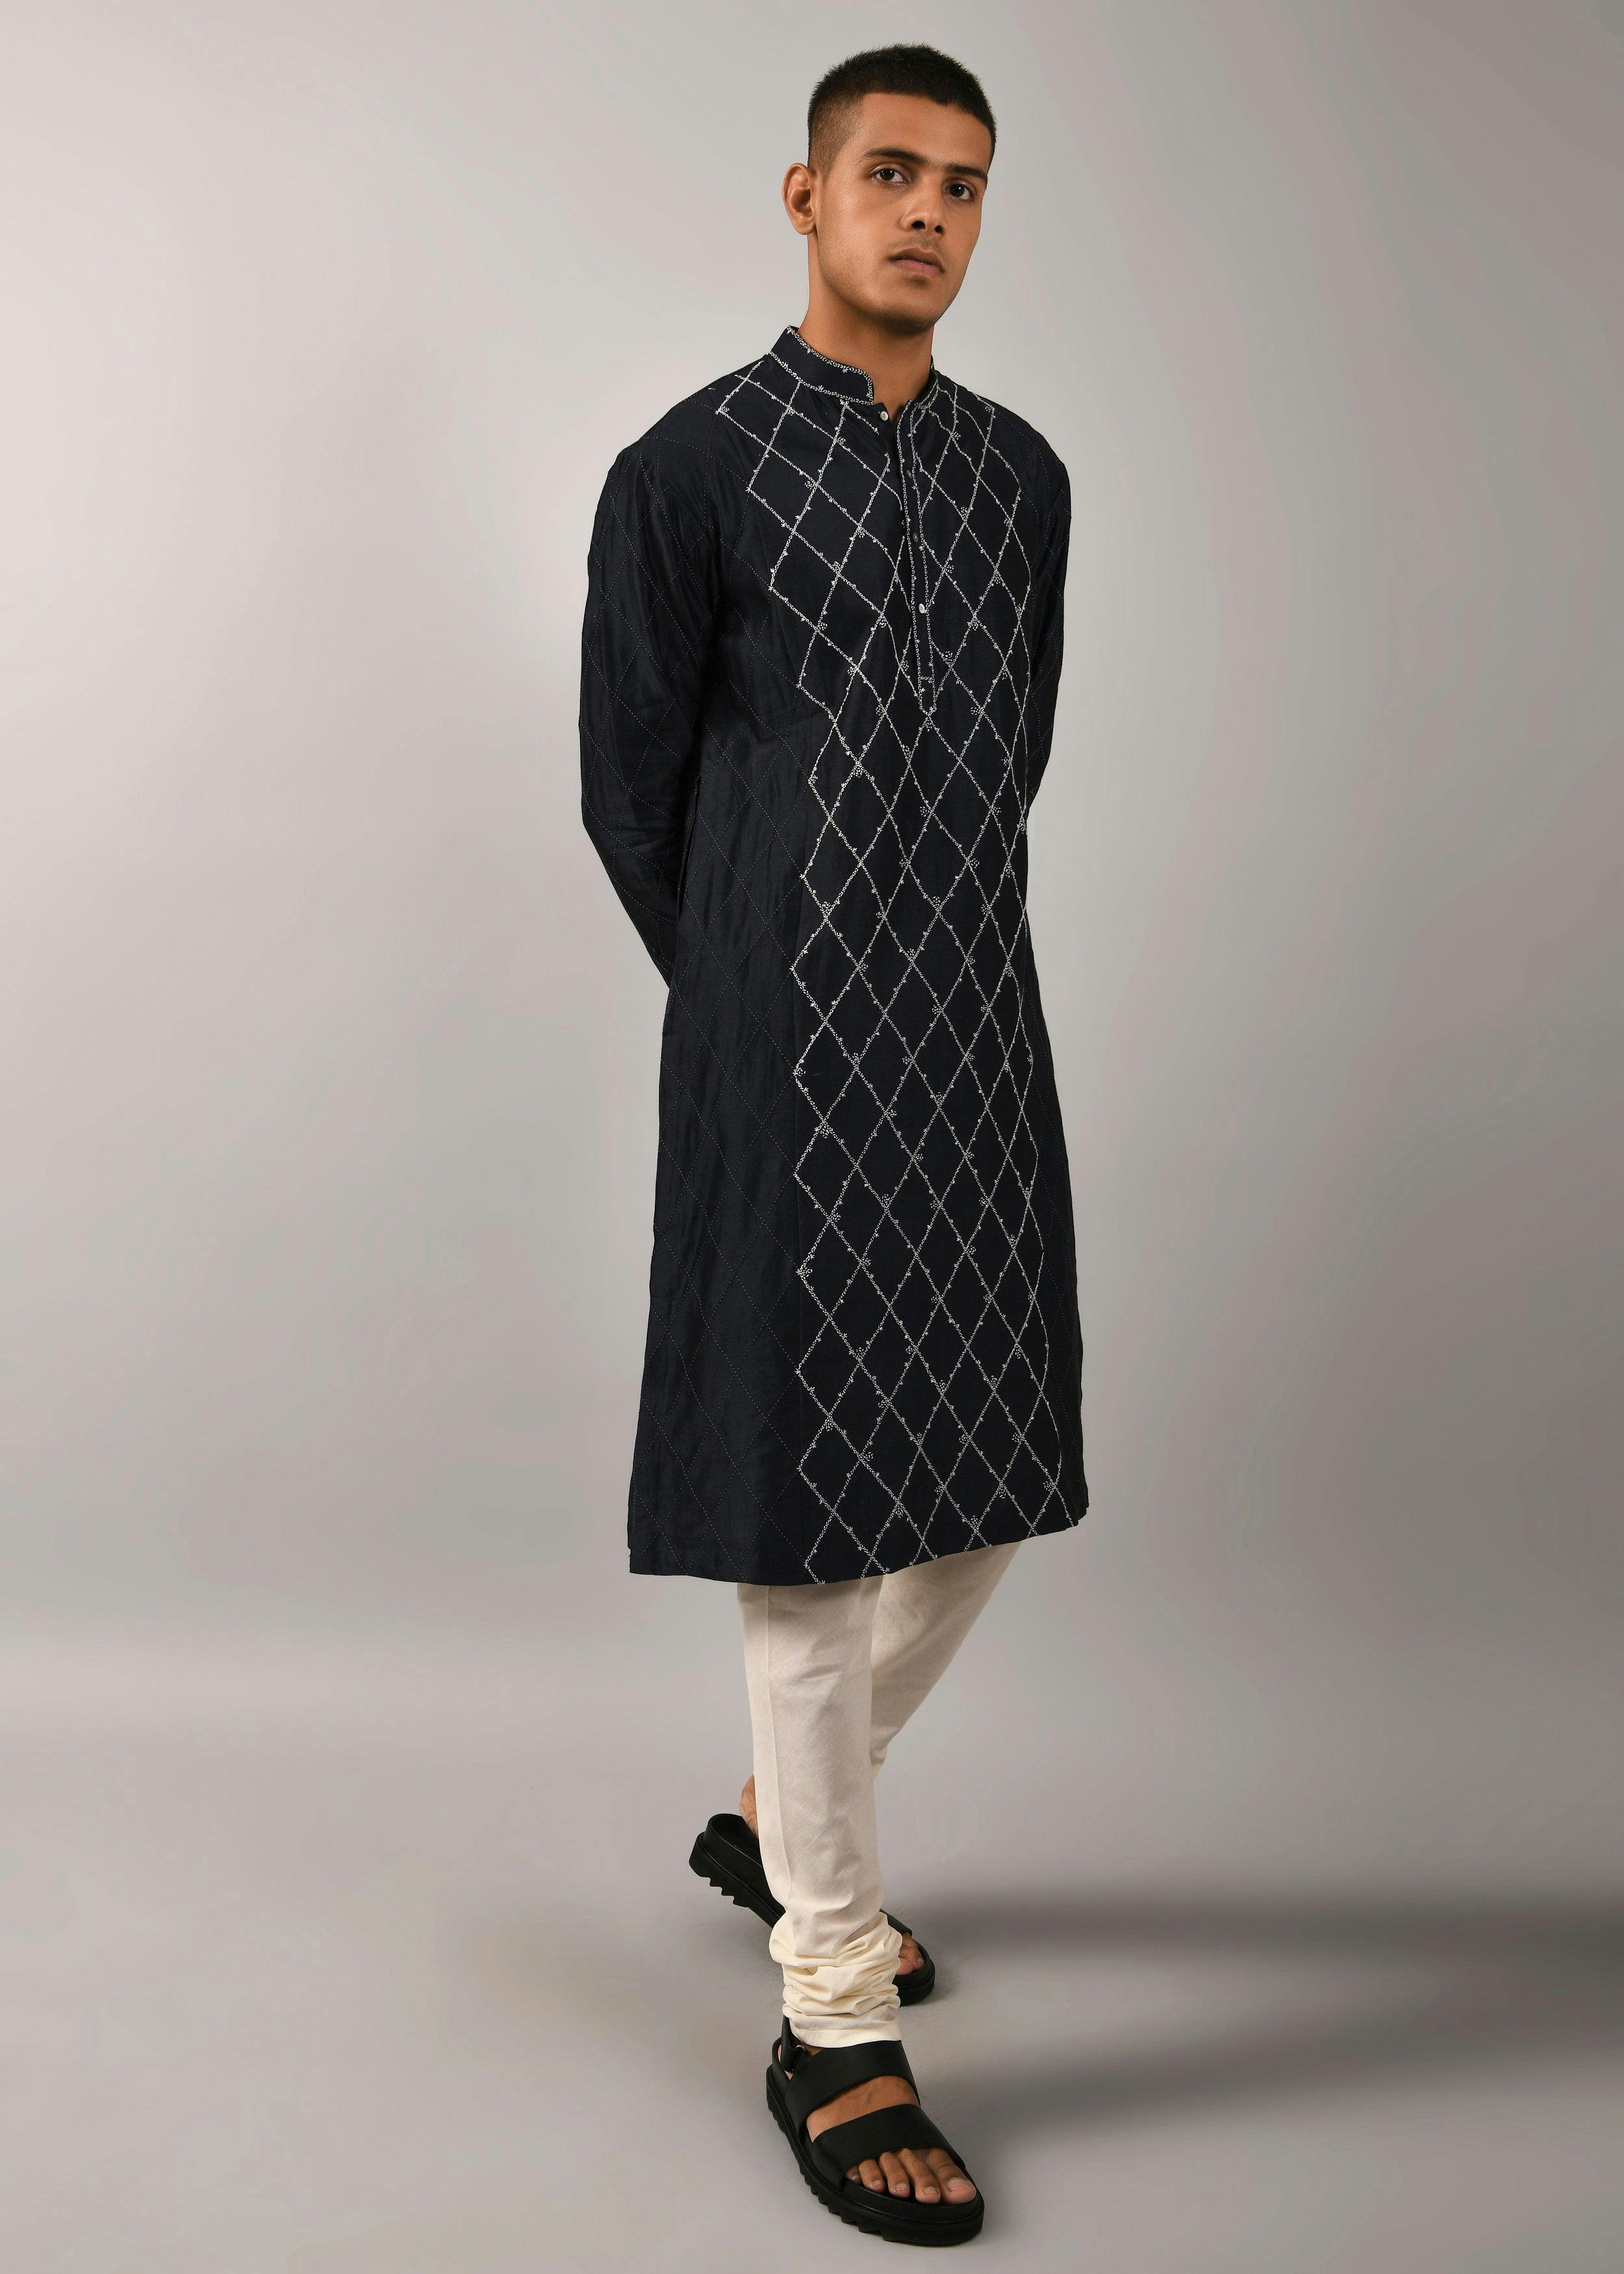 Diamond Embroidered Kurta Set, a product by Country Made